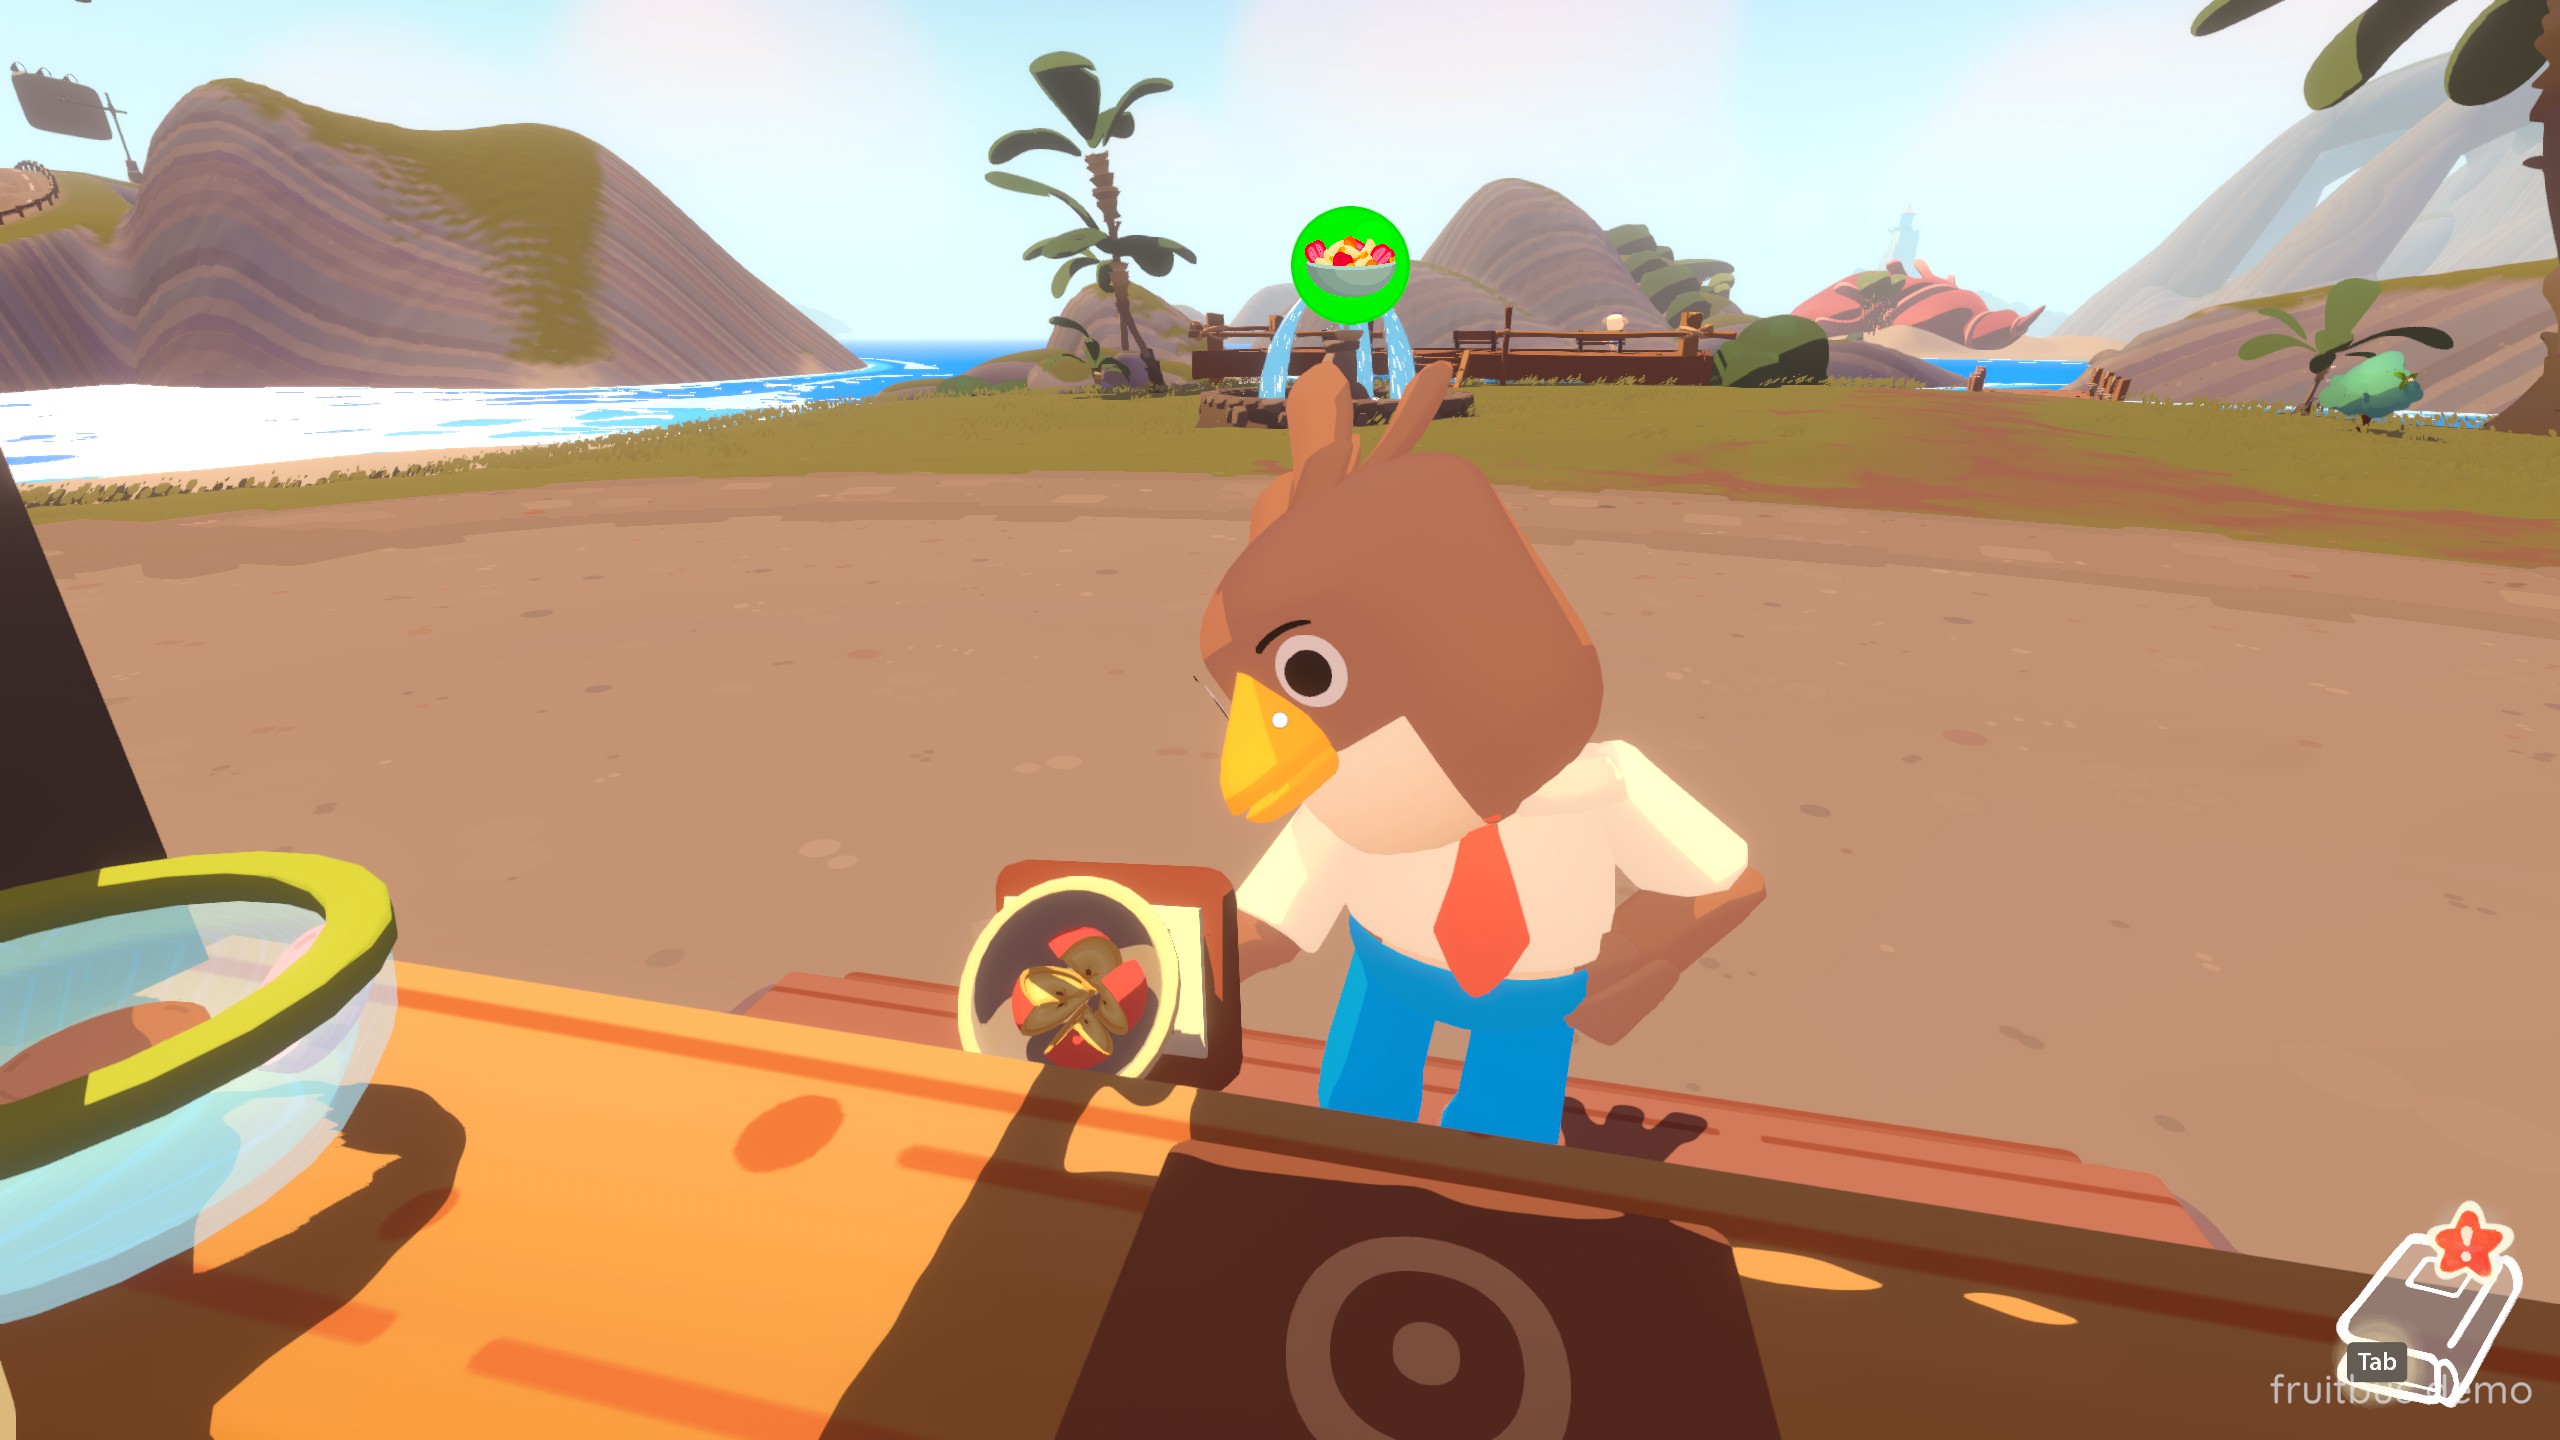 Fruitbus - a bird in business attire eats a bowl of cut apples from a food truck